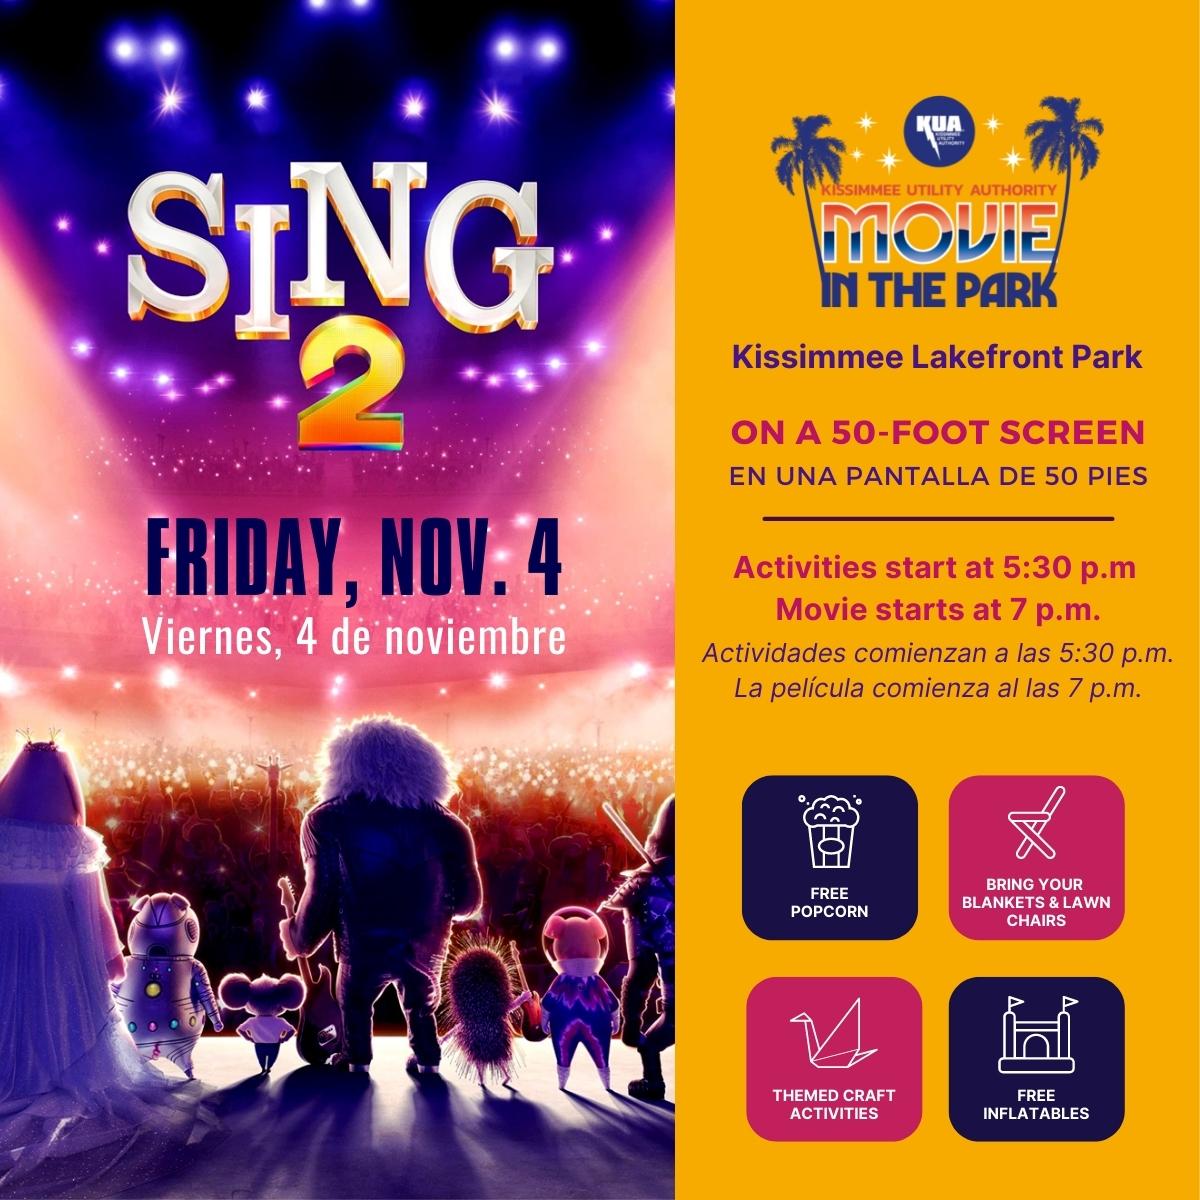 KUA Movie in the Park presenting the movie Sing 2